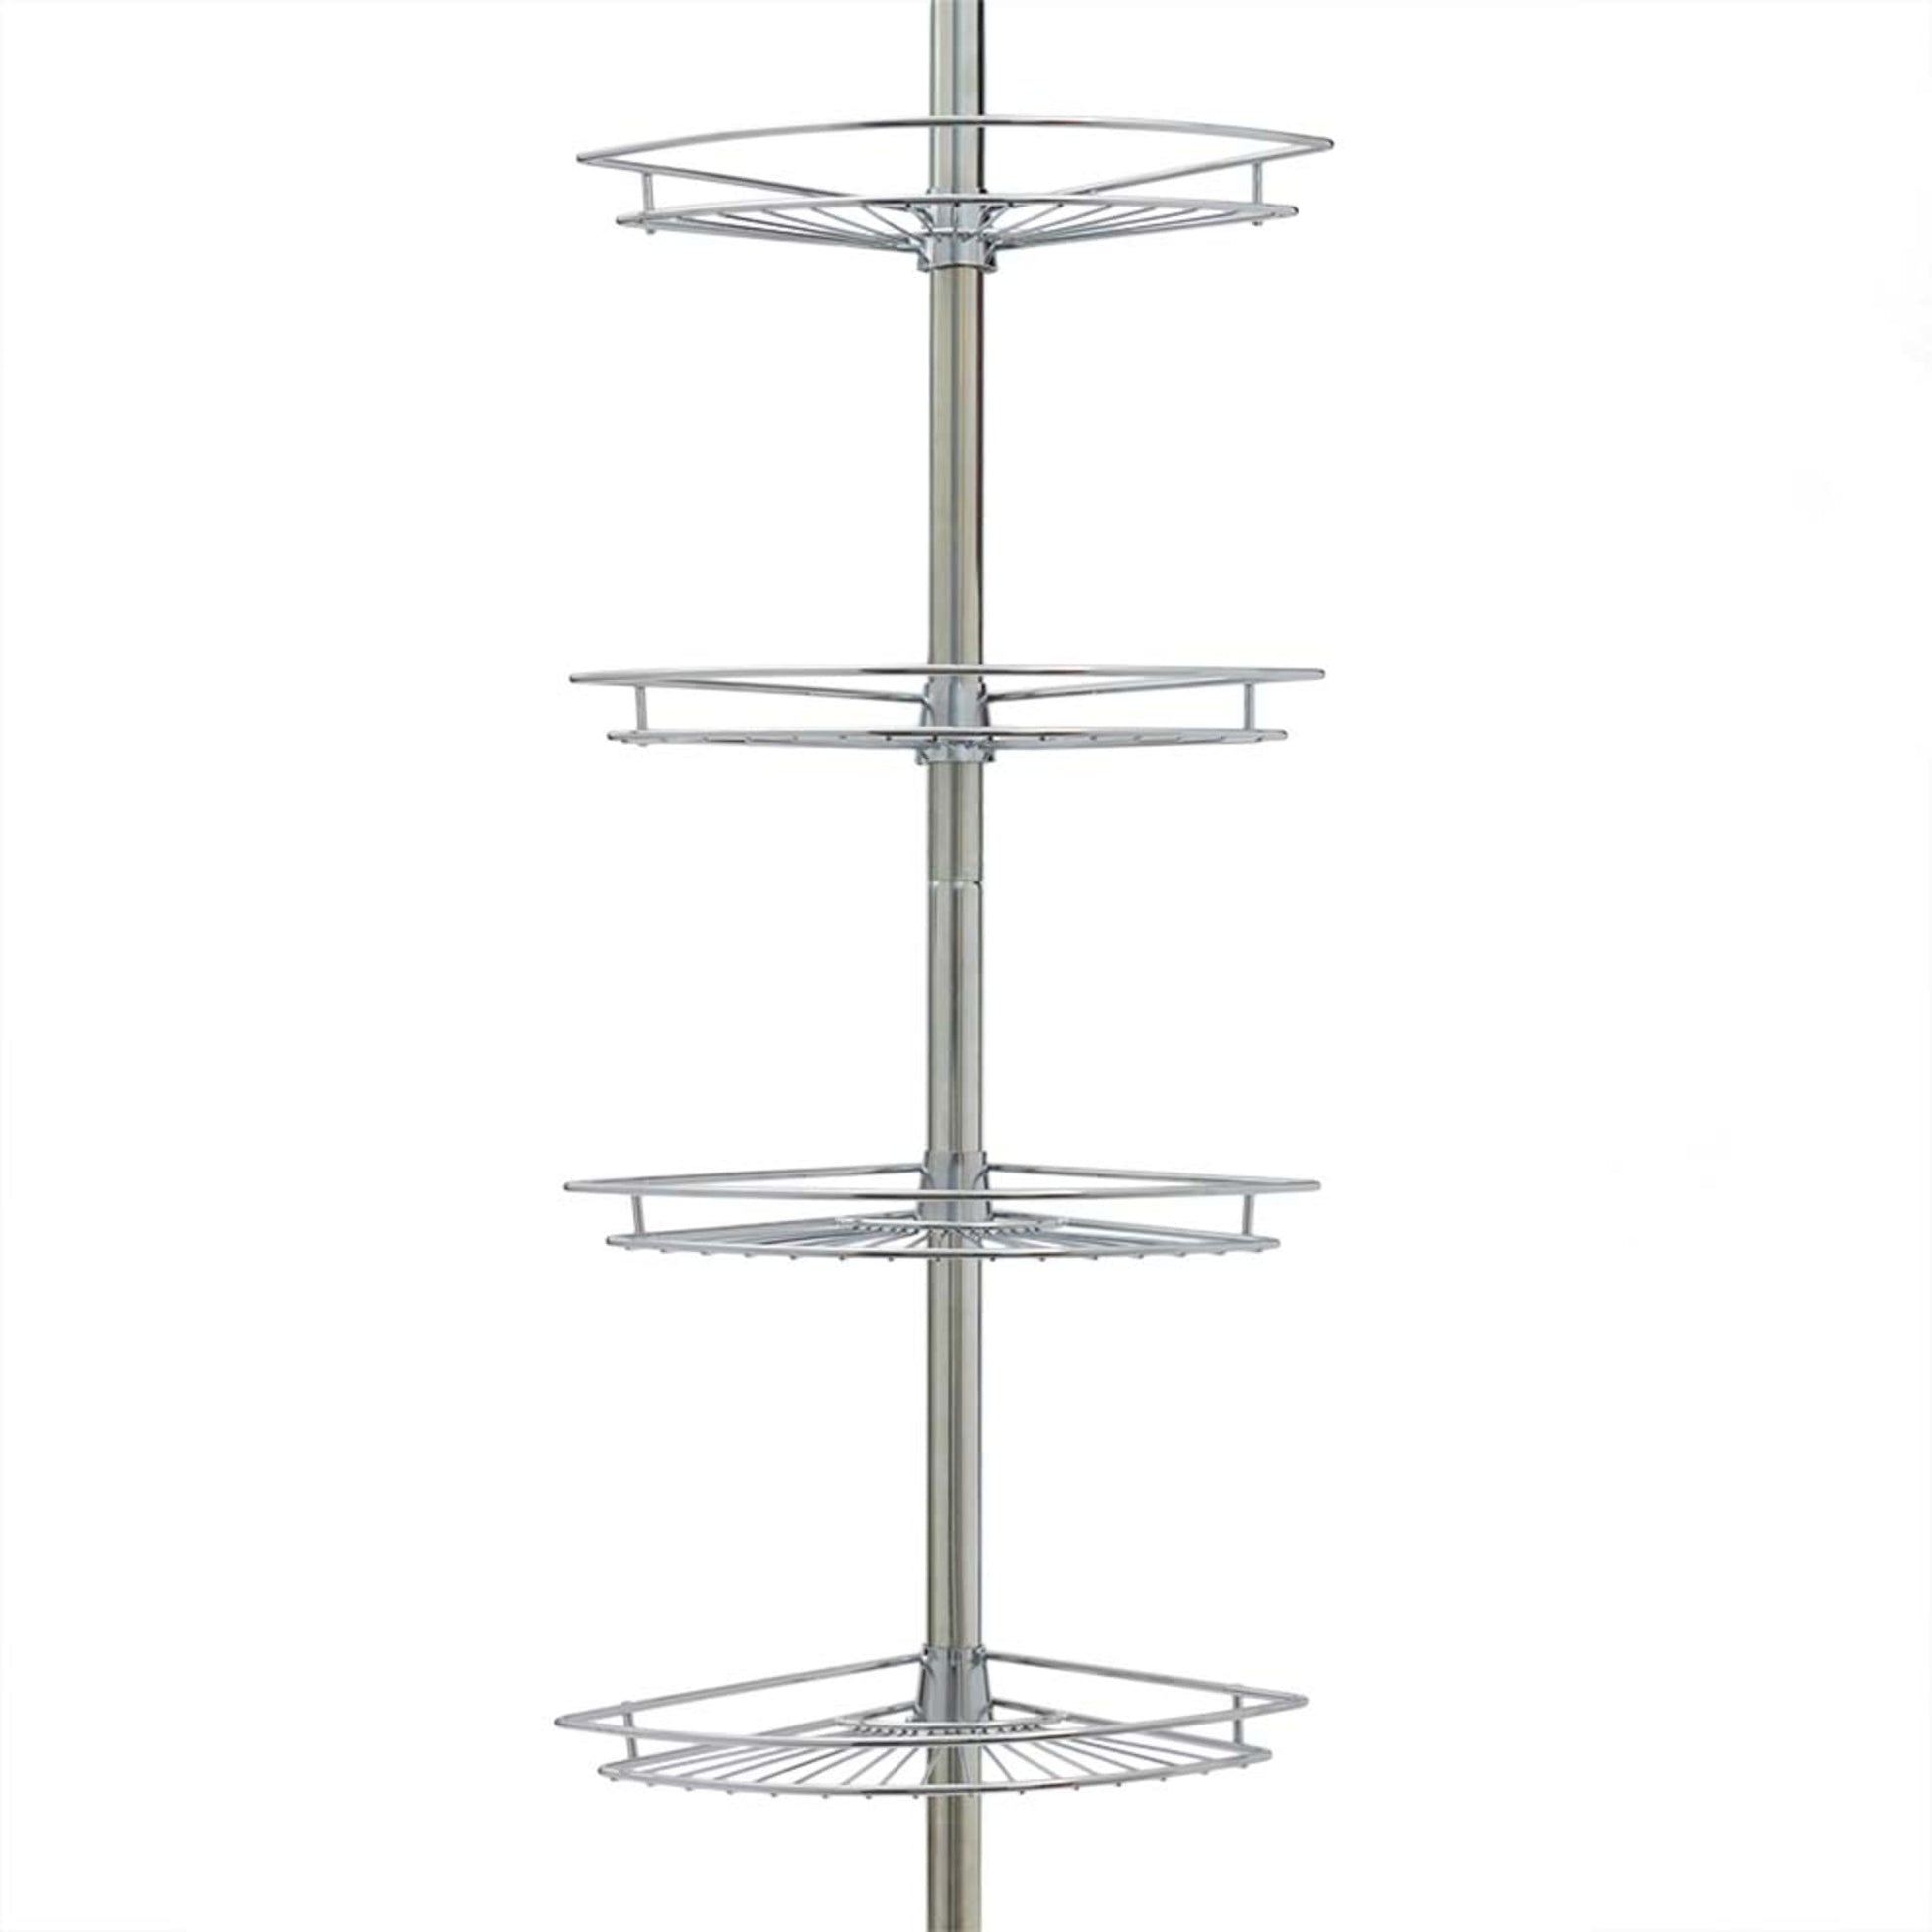 Zenna Home Tension Pole Shower Caddy 4 Basket Shelves with Built-in Towel  Bar